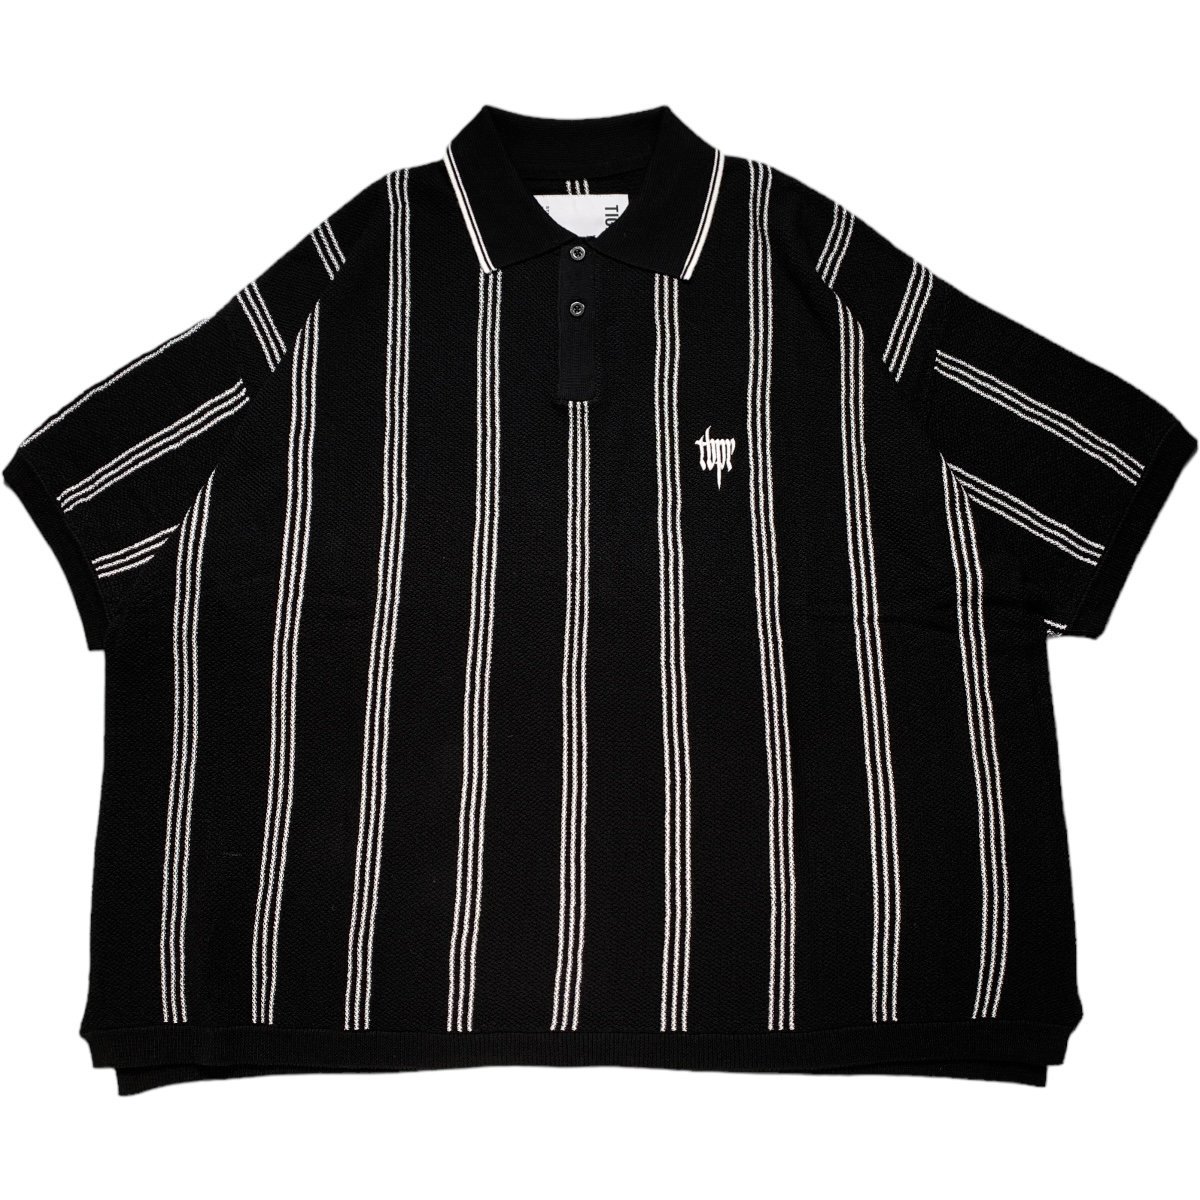 TIGHTBOOTH《タイトブース》TBPR / STRIPE KNIT POLO(SS24-KN03) | 公式通販 |  BlackSheep【ブラックシープ】Official Online Store